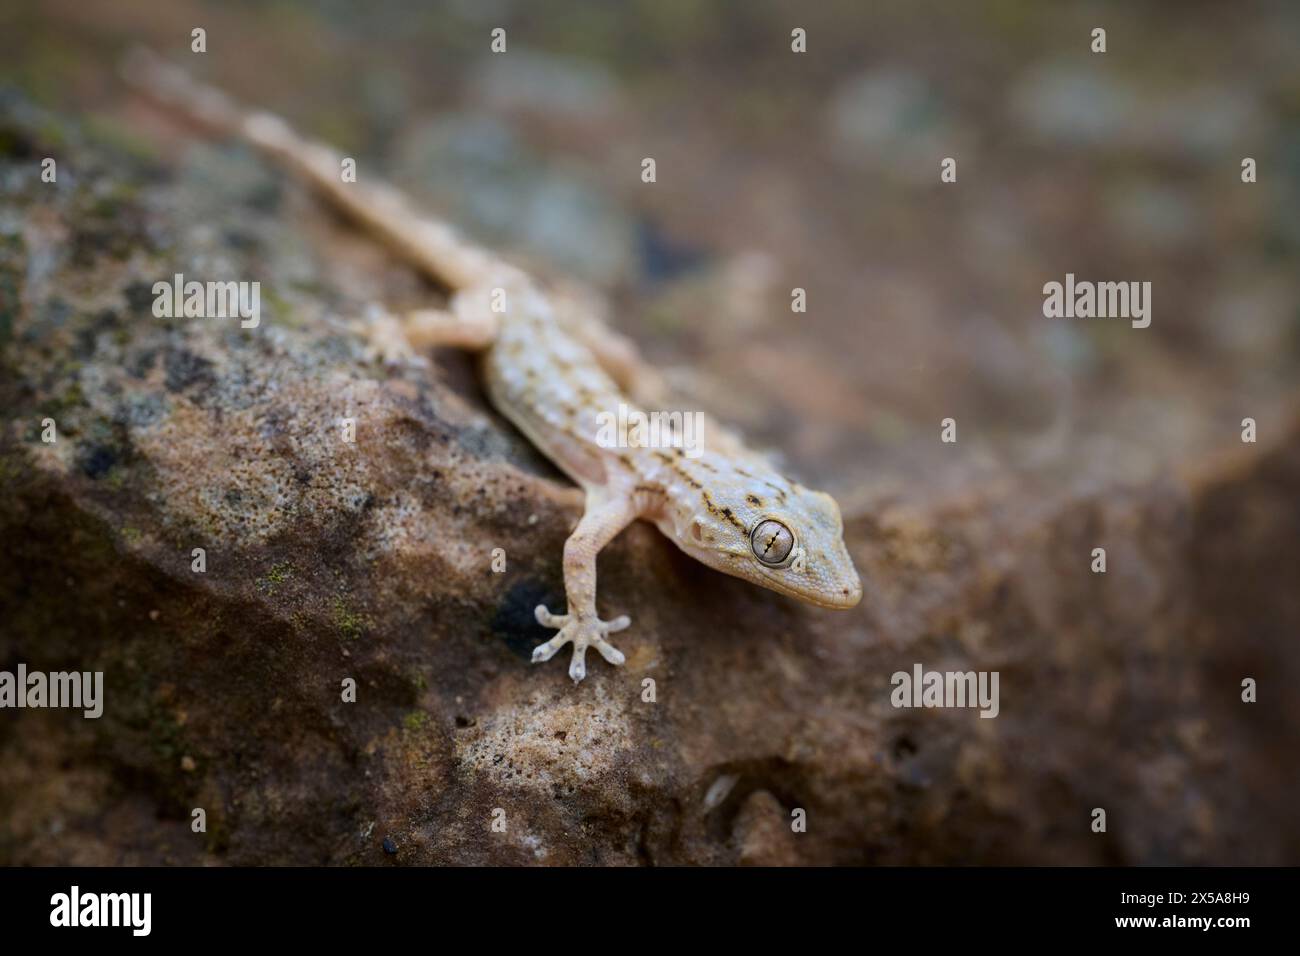 A Mauritanian gecko, Tarentola mauritanica, poised on a stone surface in its natural habitat, captured in a close-up photograph. Stock Photo